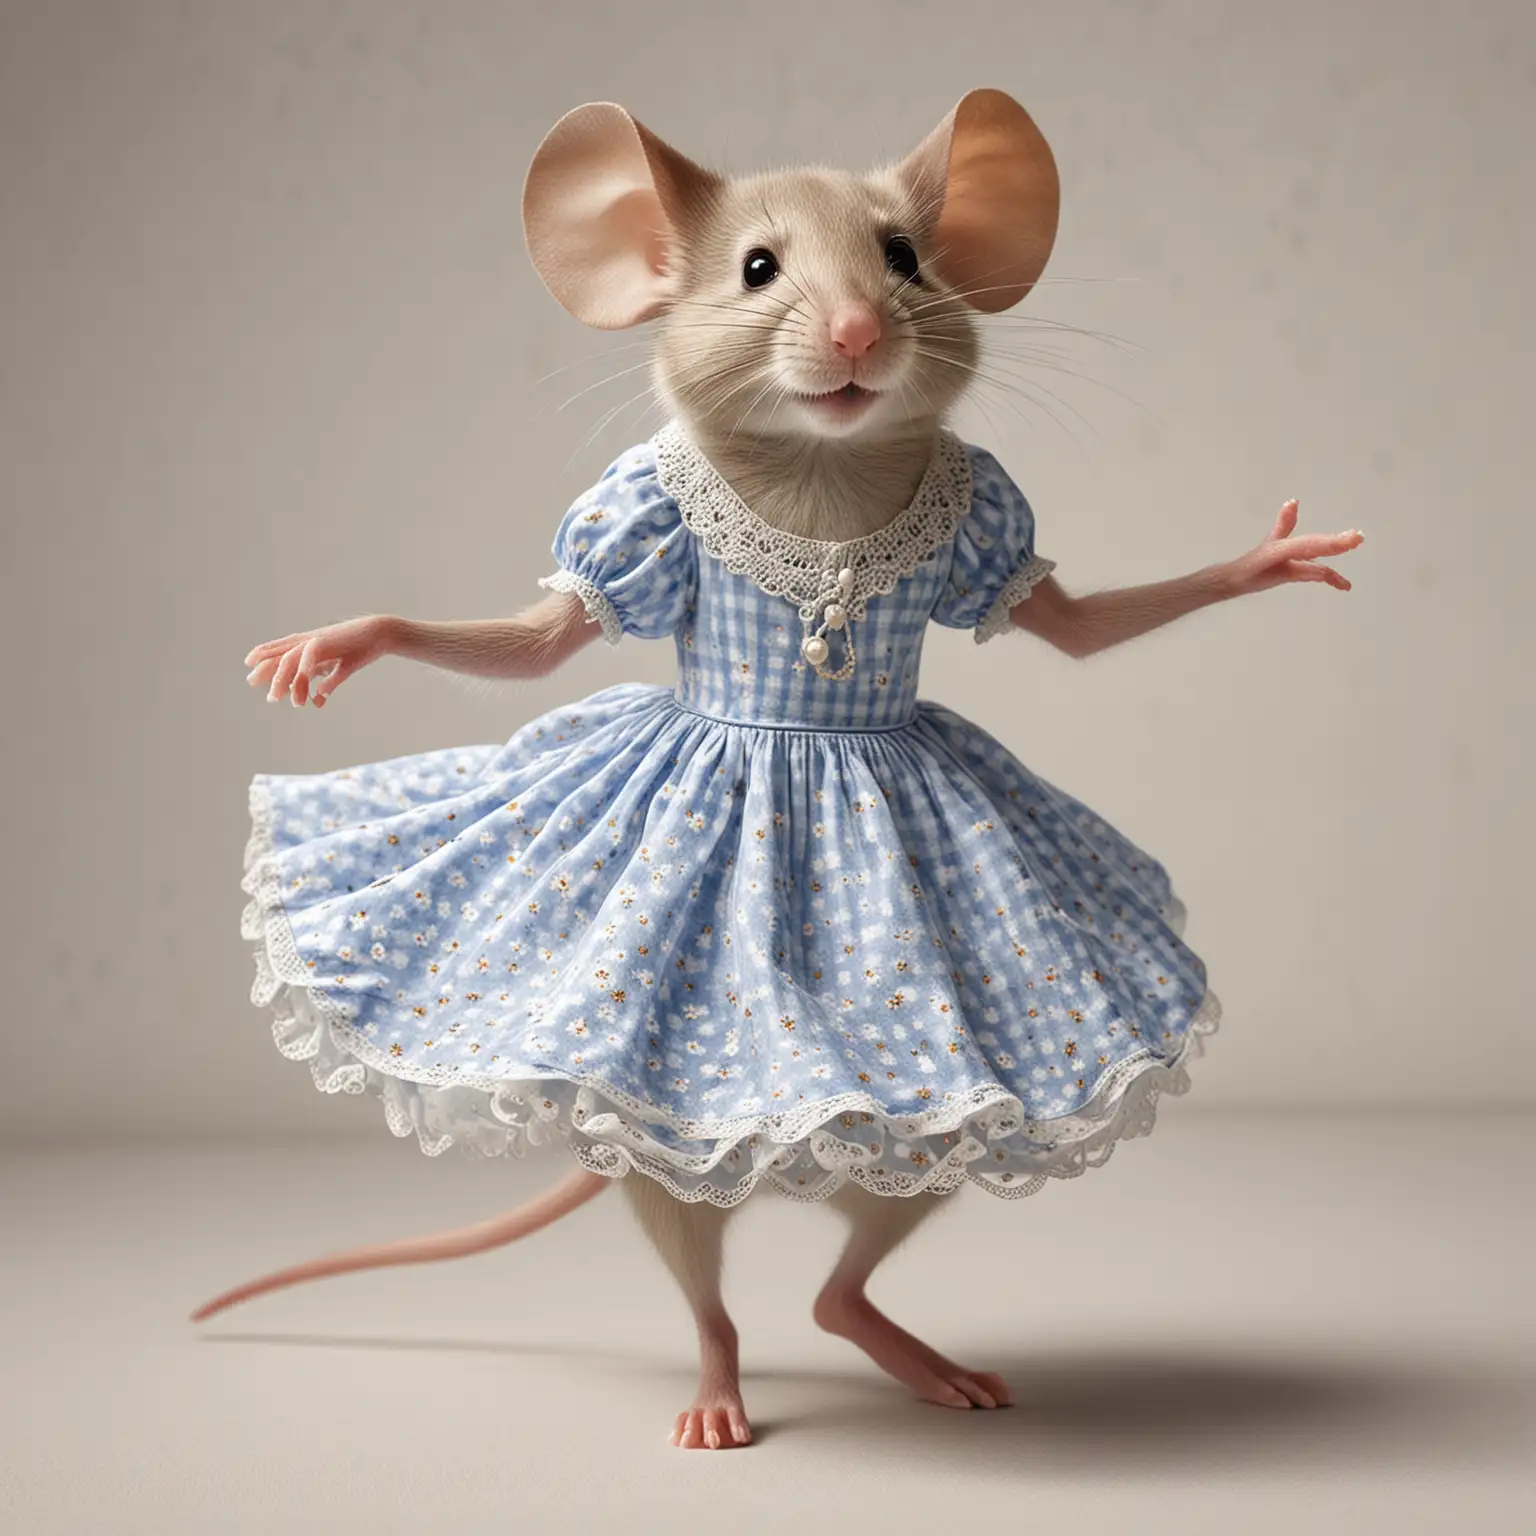 Whimsical Mouse Dancing in a Flowing Dress